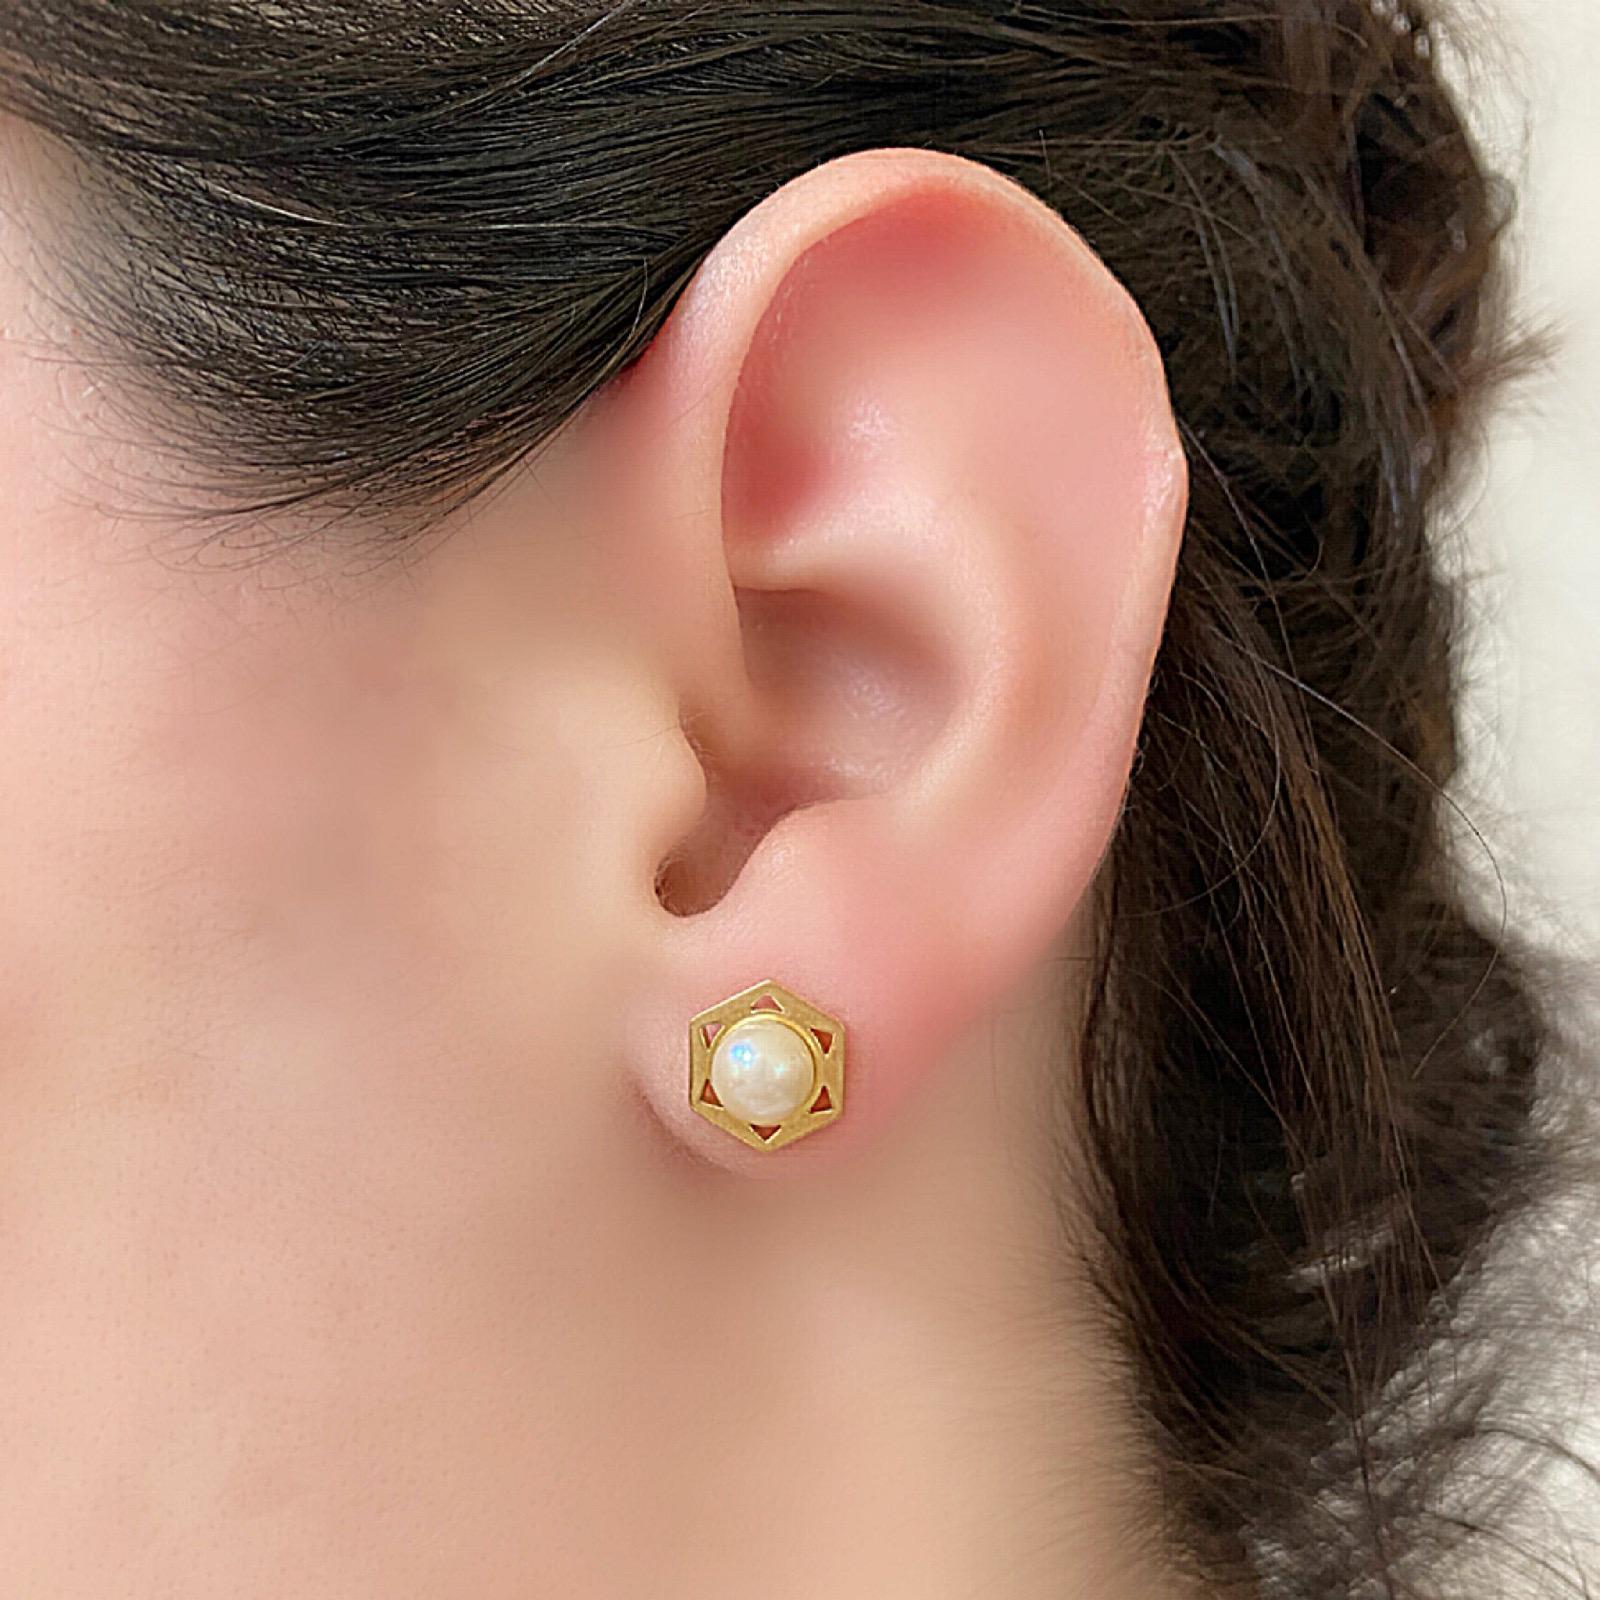 A modern version of a classic pearl stud.  You can wear the stud alone, or paired with the pearl jacket in back for a totally updated look. 
These earrings will take you from the office to dinner.

